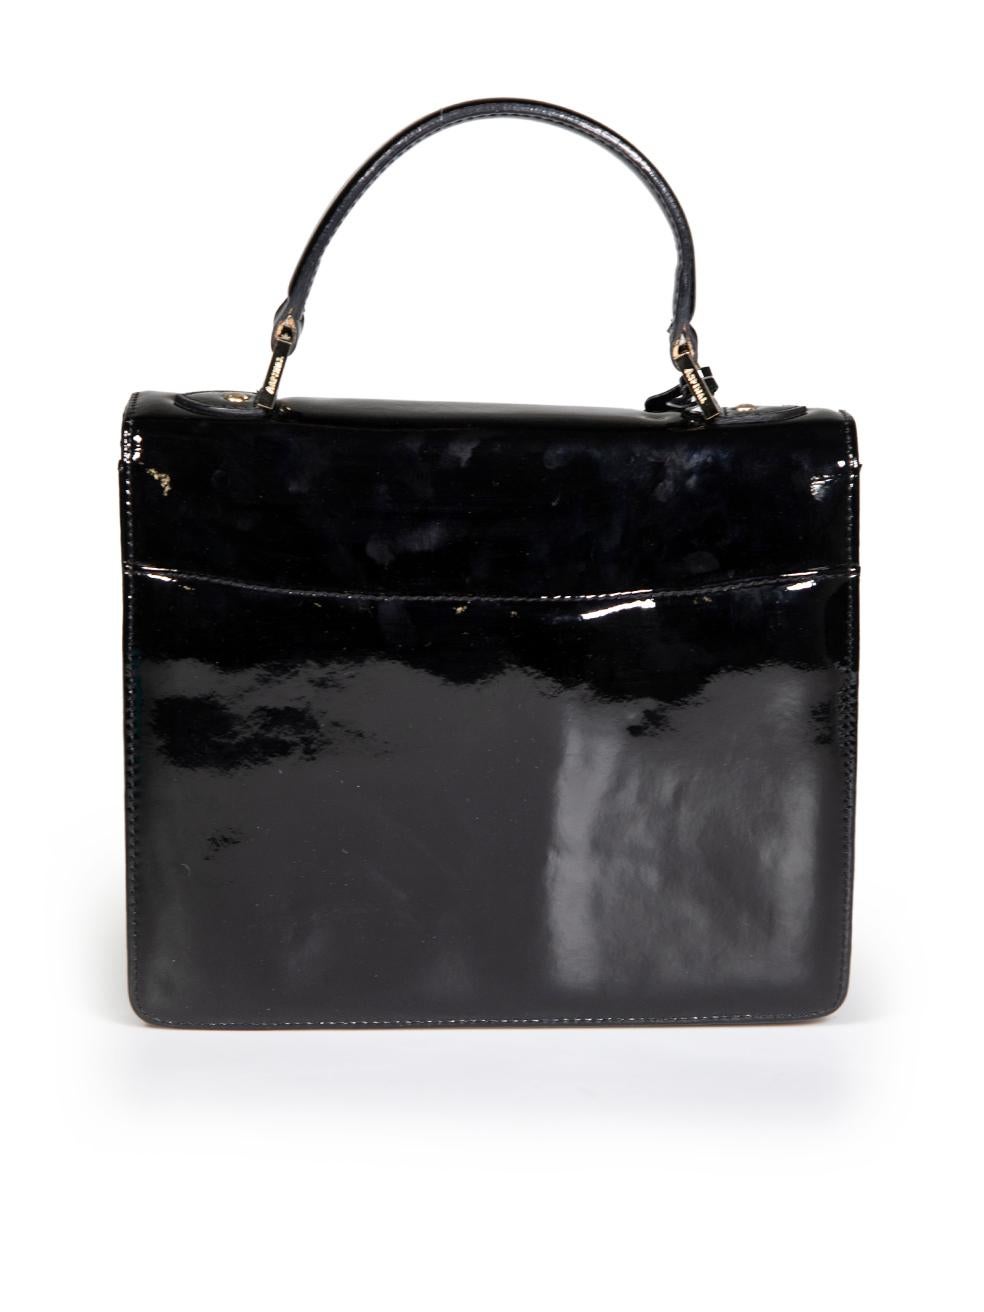 Women's Aspinal of London Black Patent Mayfair Top-Handle Bag For Sale